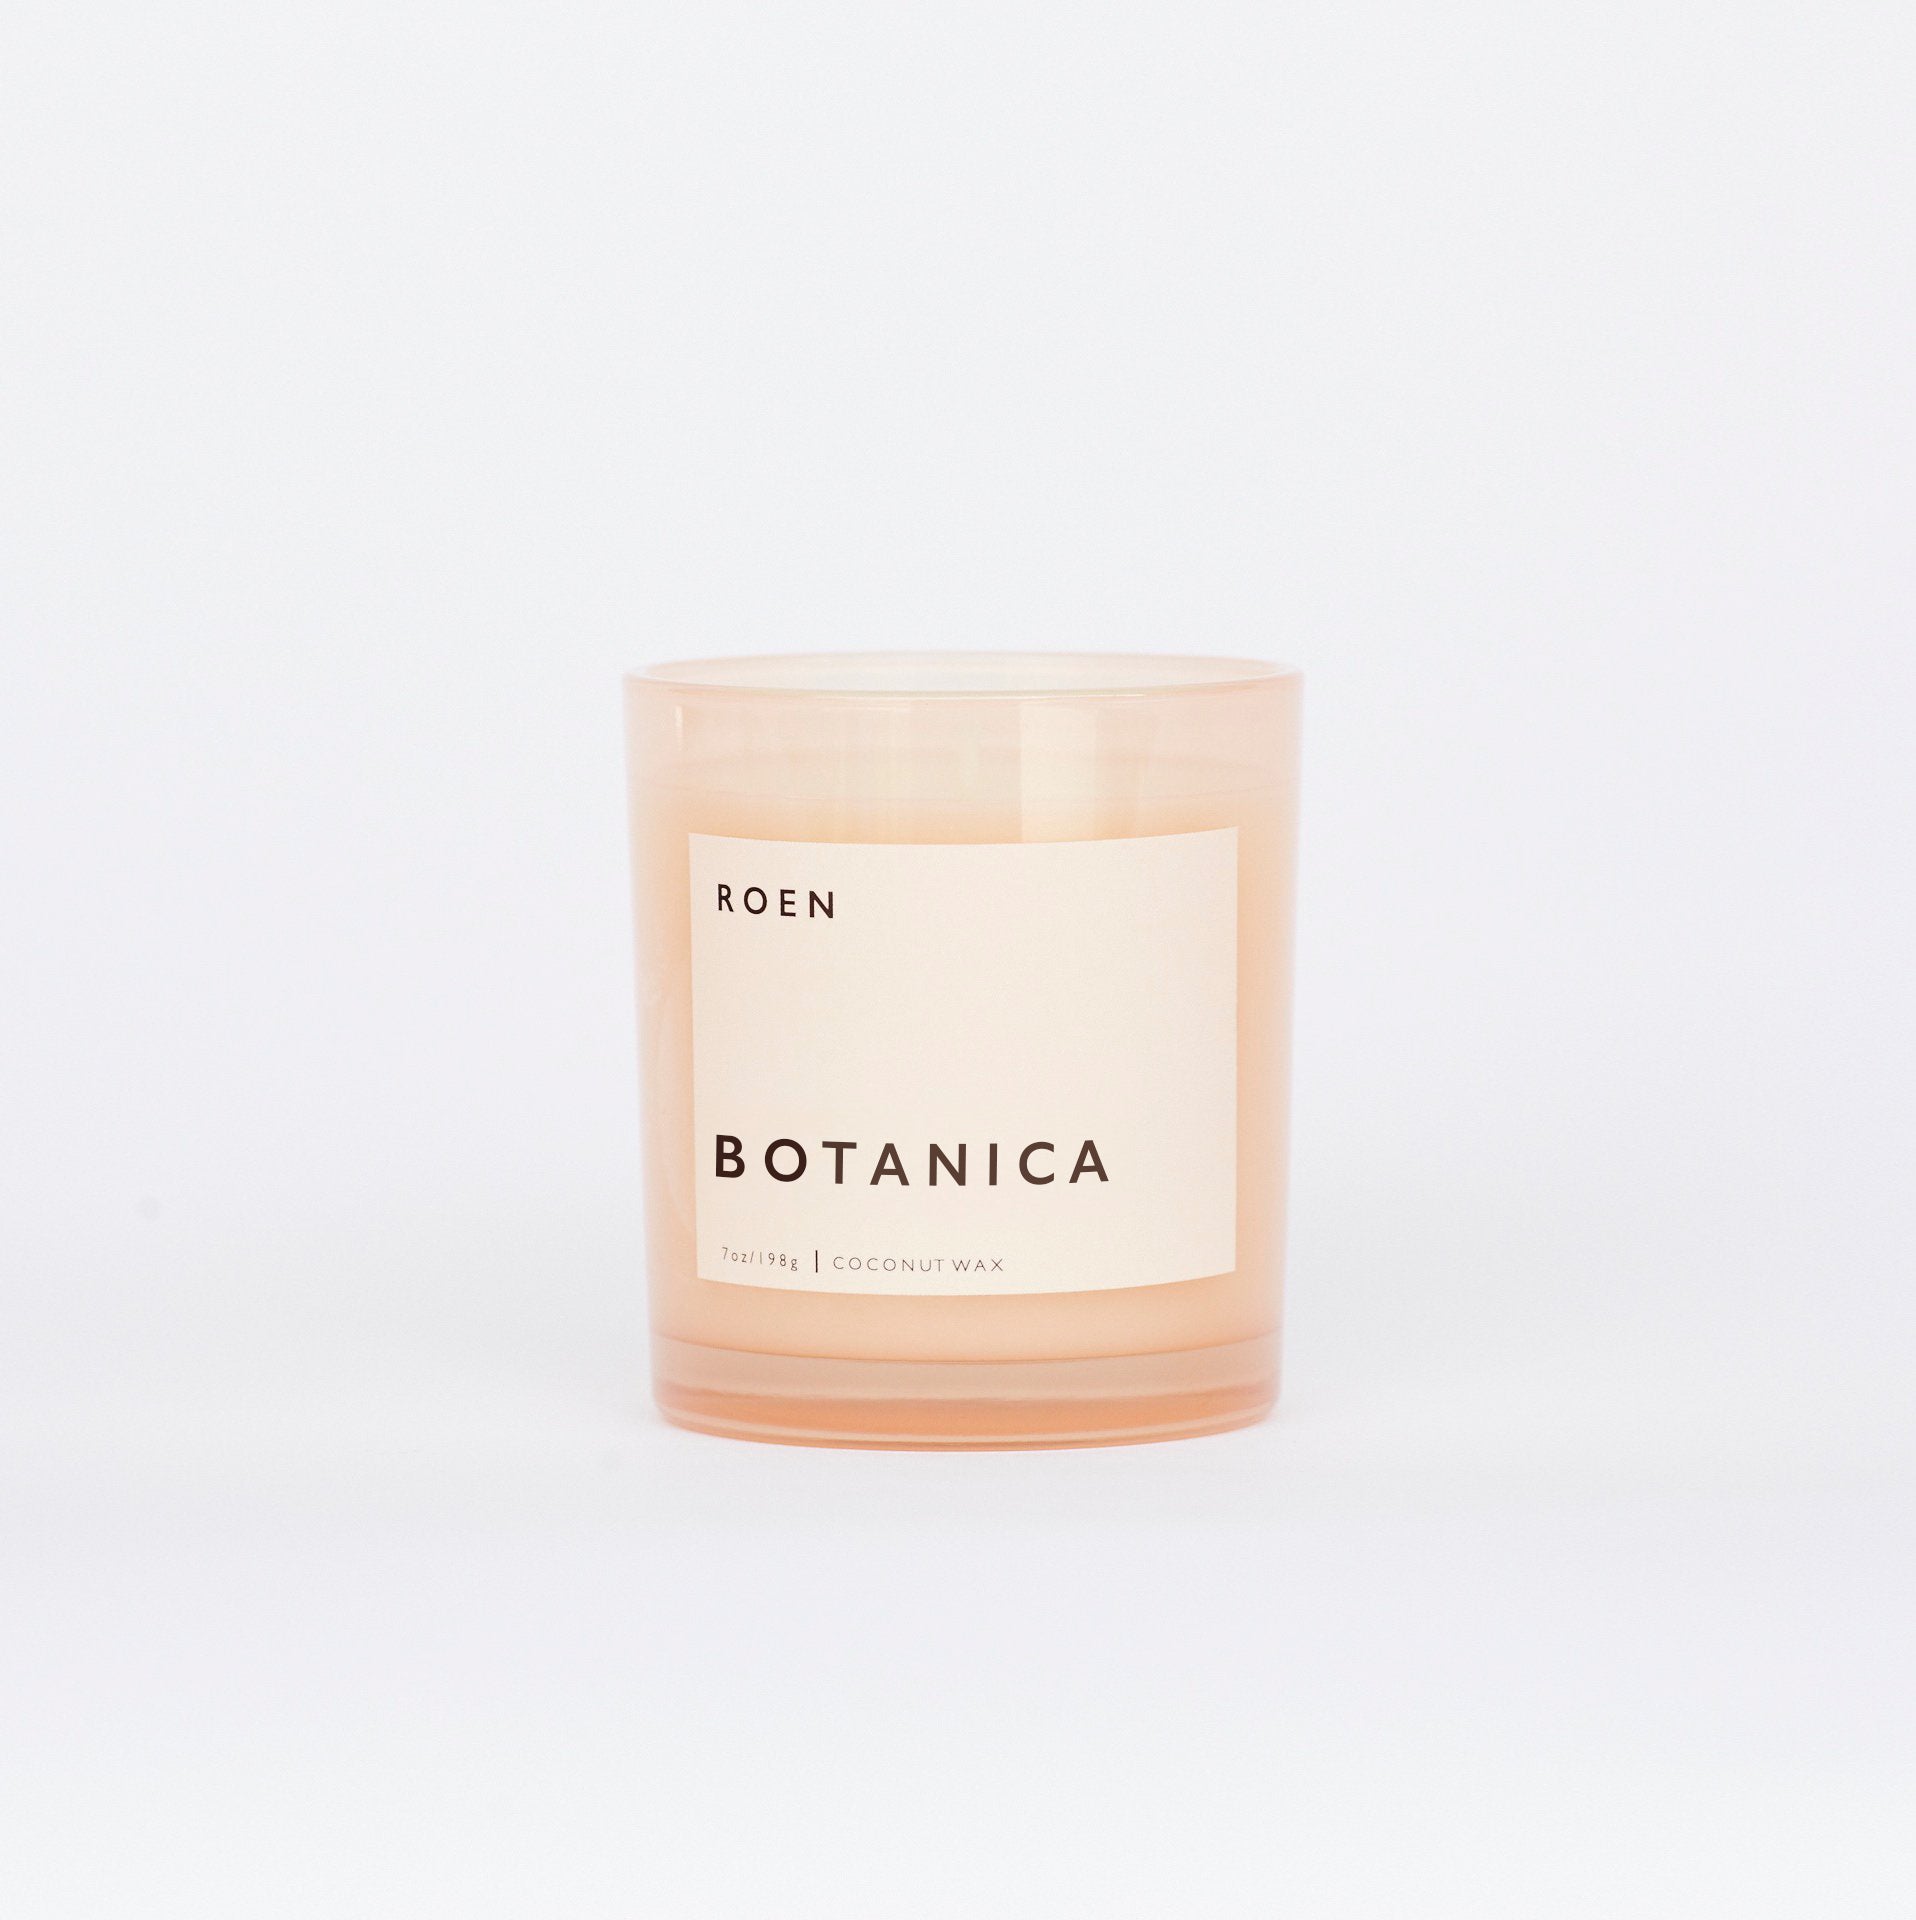 Roen Candles - Botanica - The Crowd Went Wild